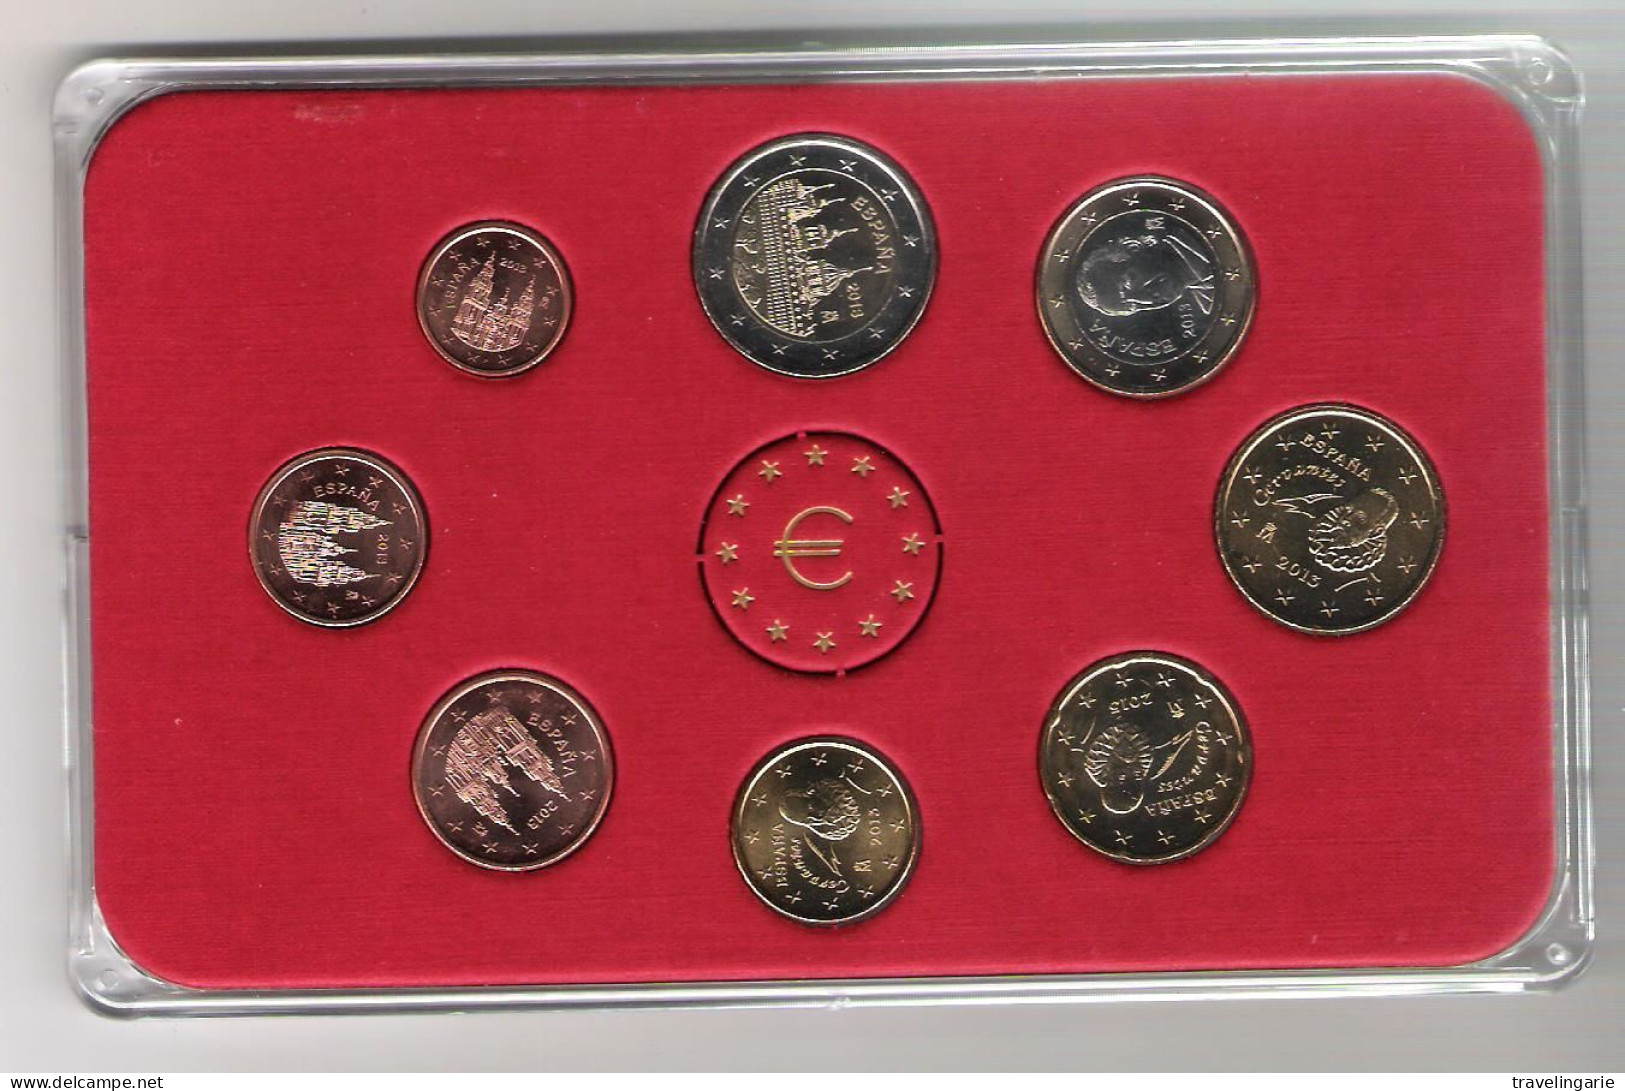 Spain 2013 Euro Set In Blister With LV-G233 BU/UNC - Spain